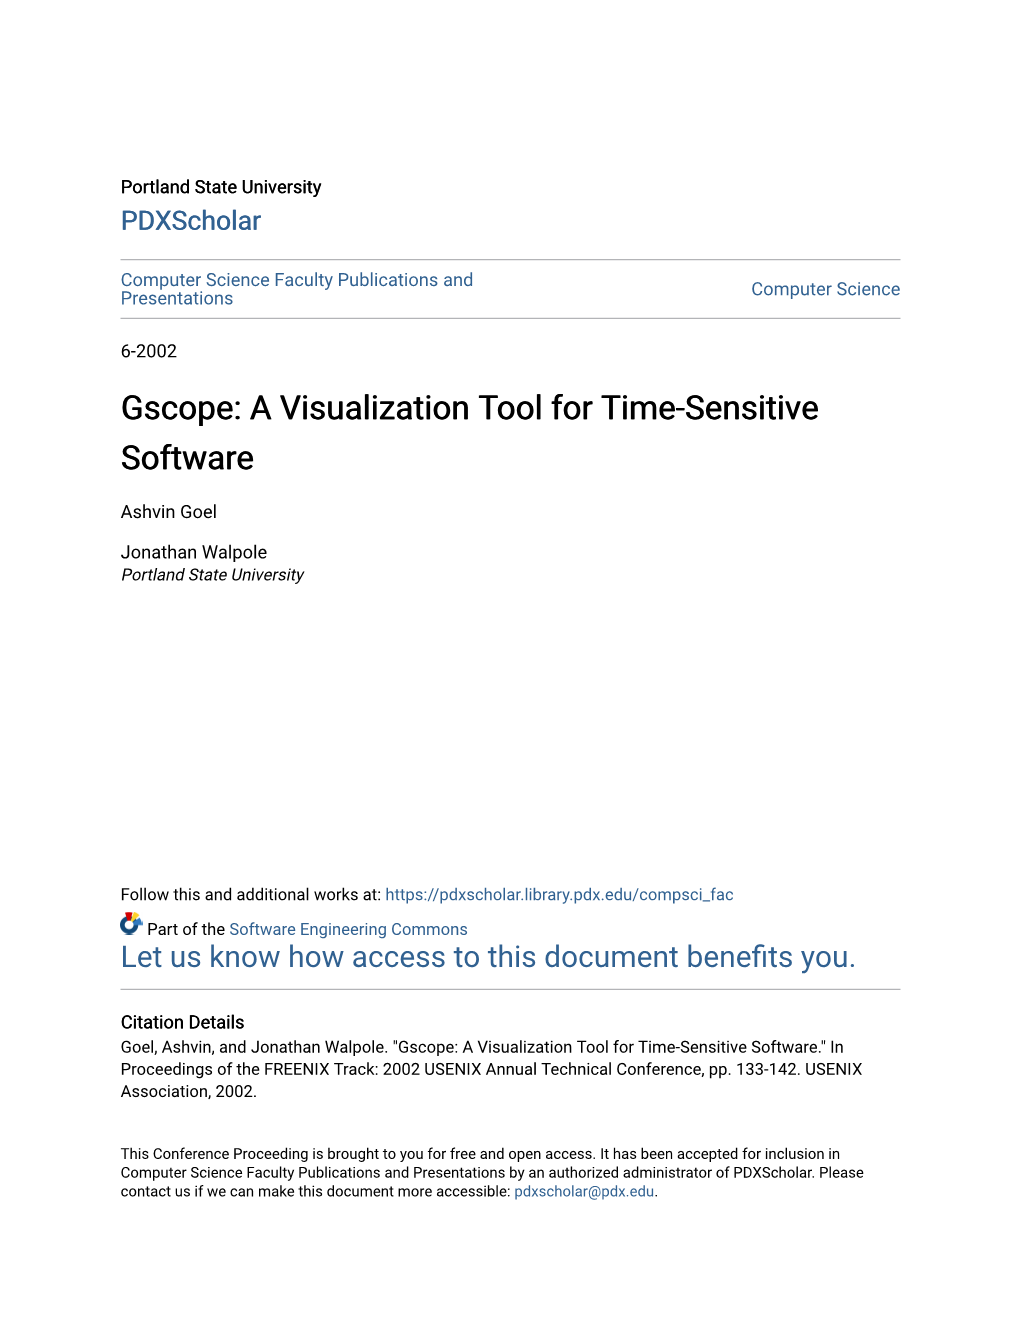 A Visualization Tool for Time-Sensitive Software